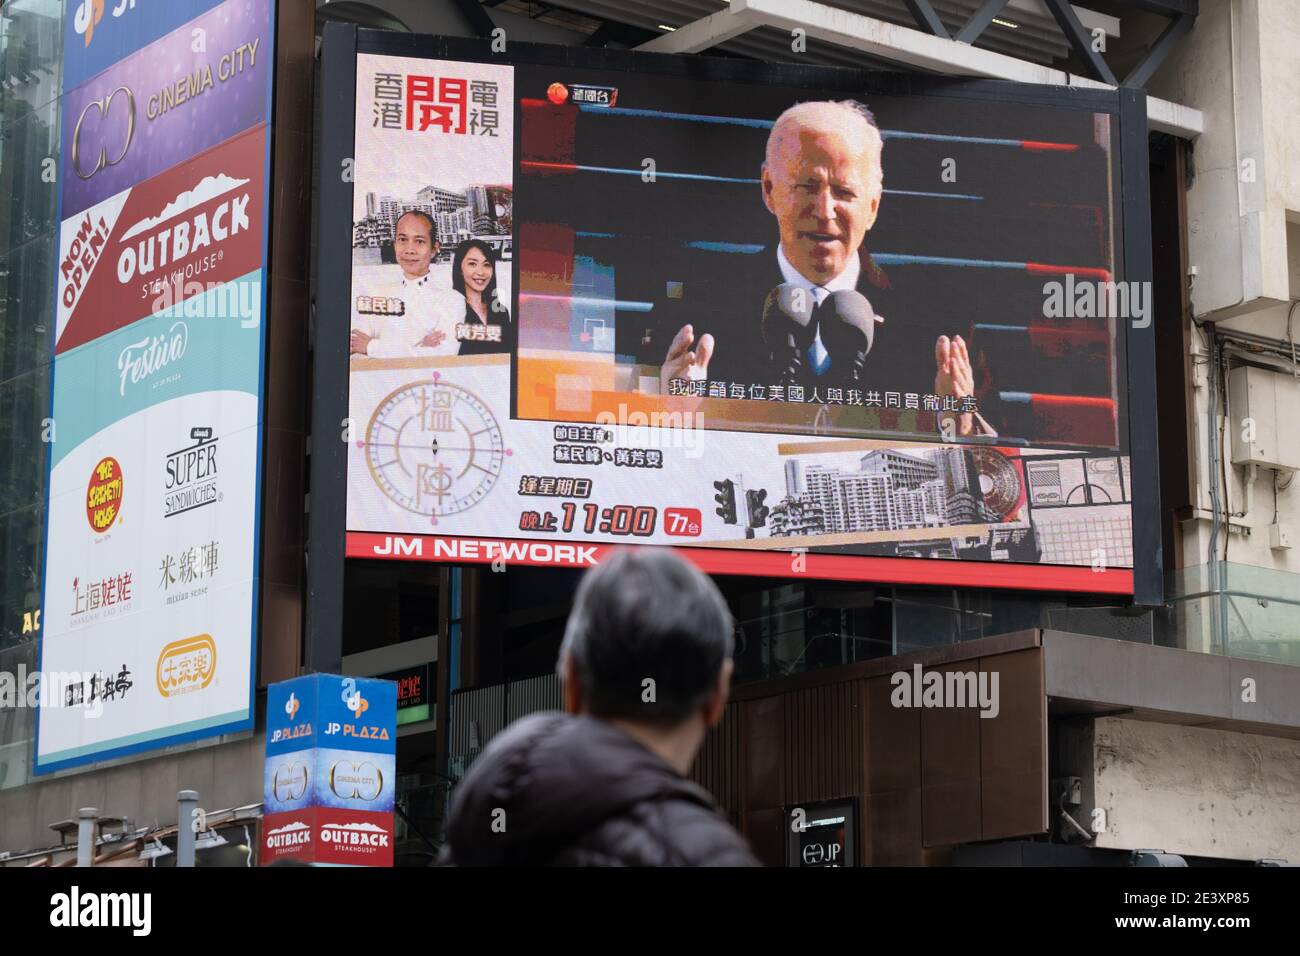 A man is seen watching the news report of the inauguration of U.S. President Joe Biden on a large screen. Stock Photo